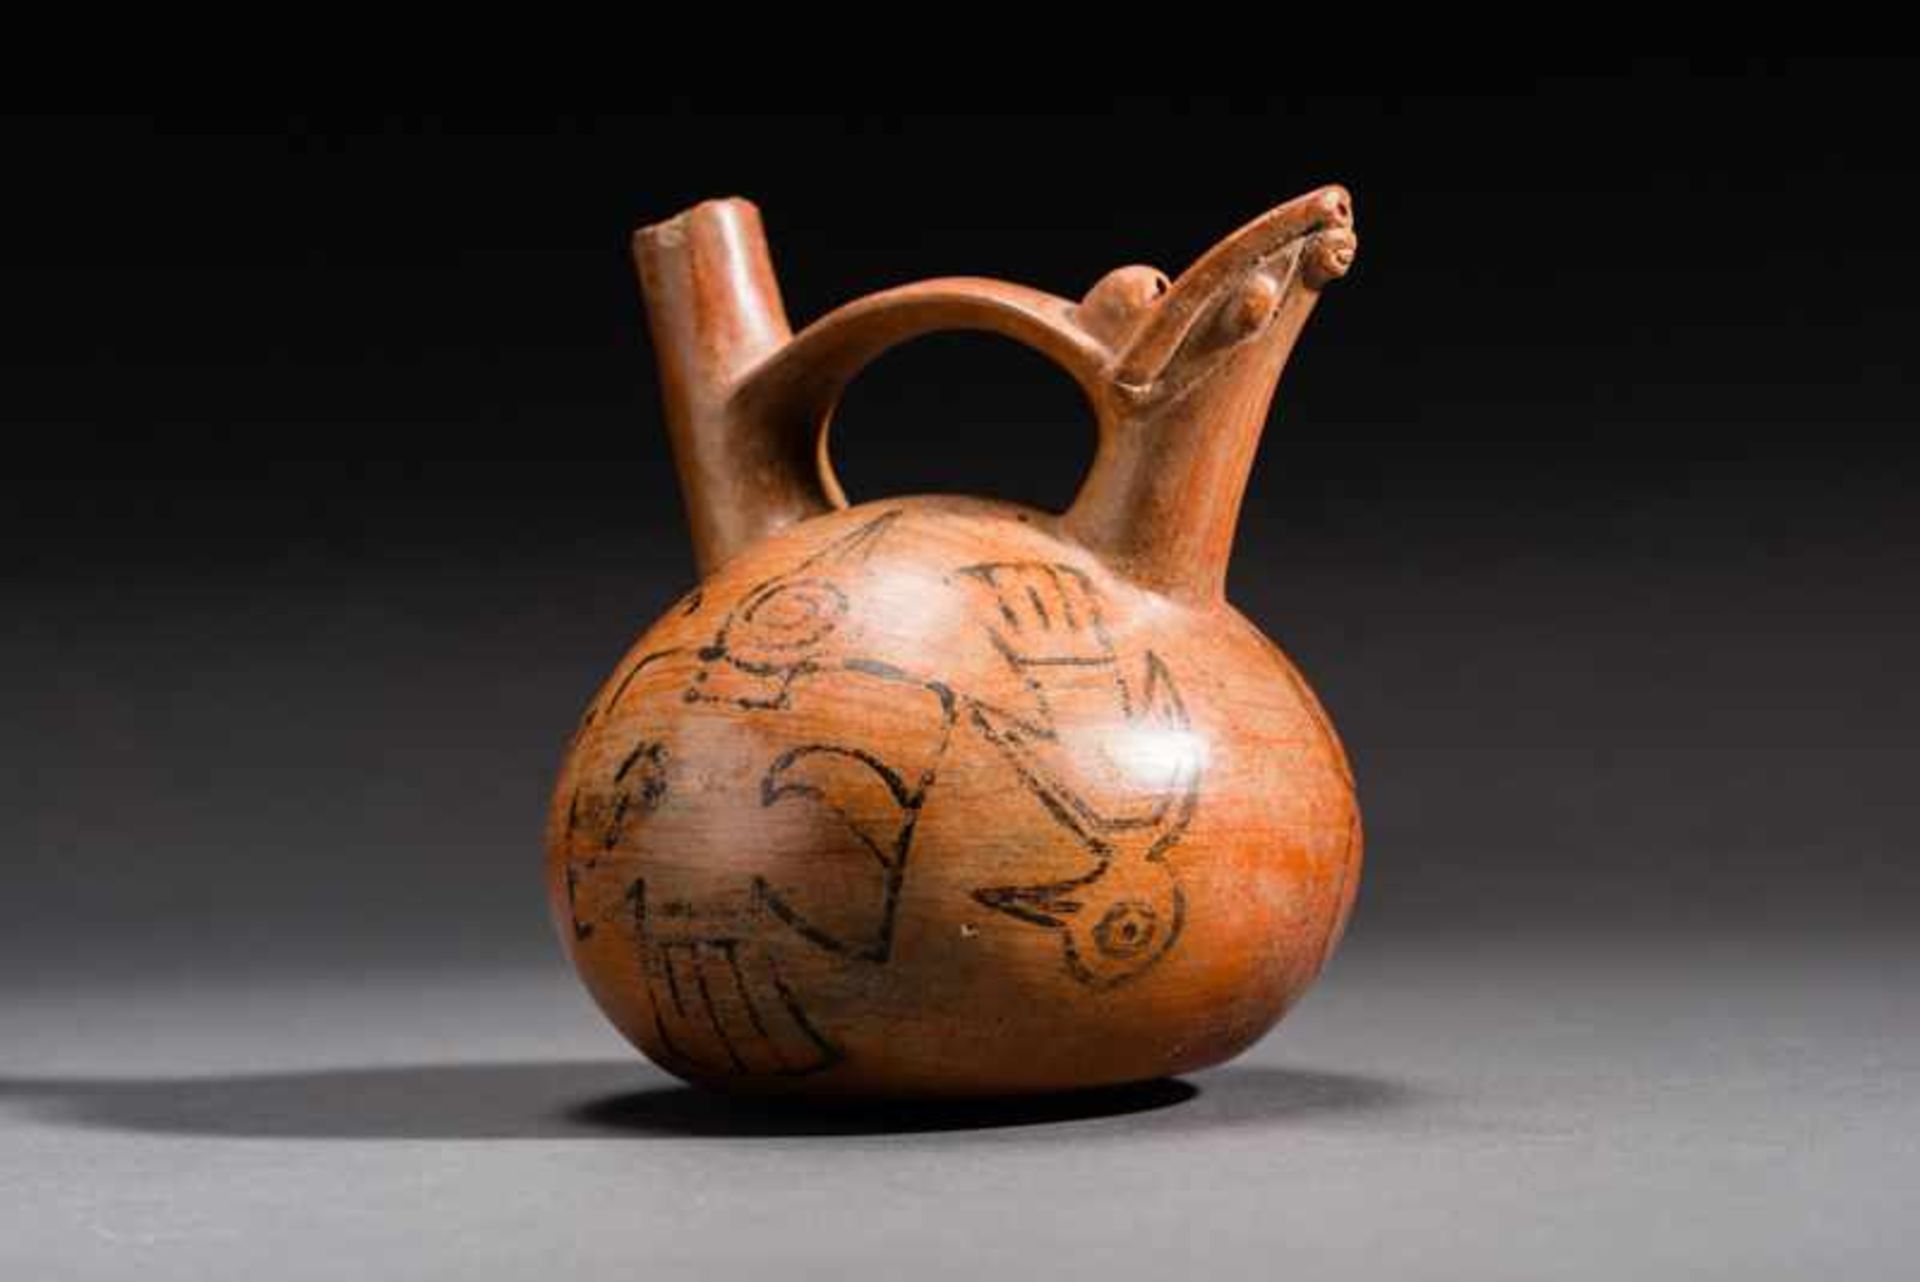 PIPE VESSEL WITH AVIARY DECORATION Terracotta and pain. Salinar, ca. 300 anteSpherical vessel with a - Image 2 of 4